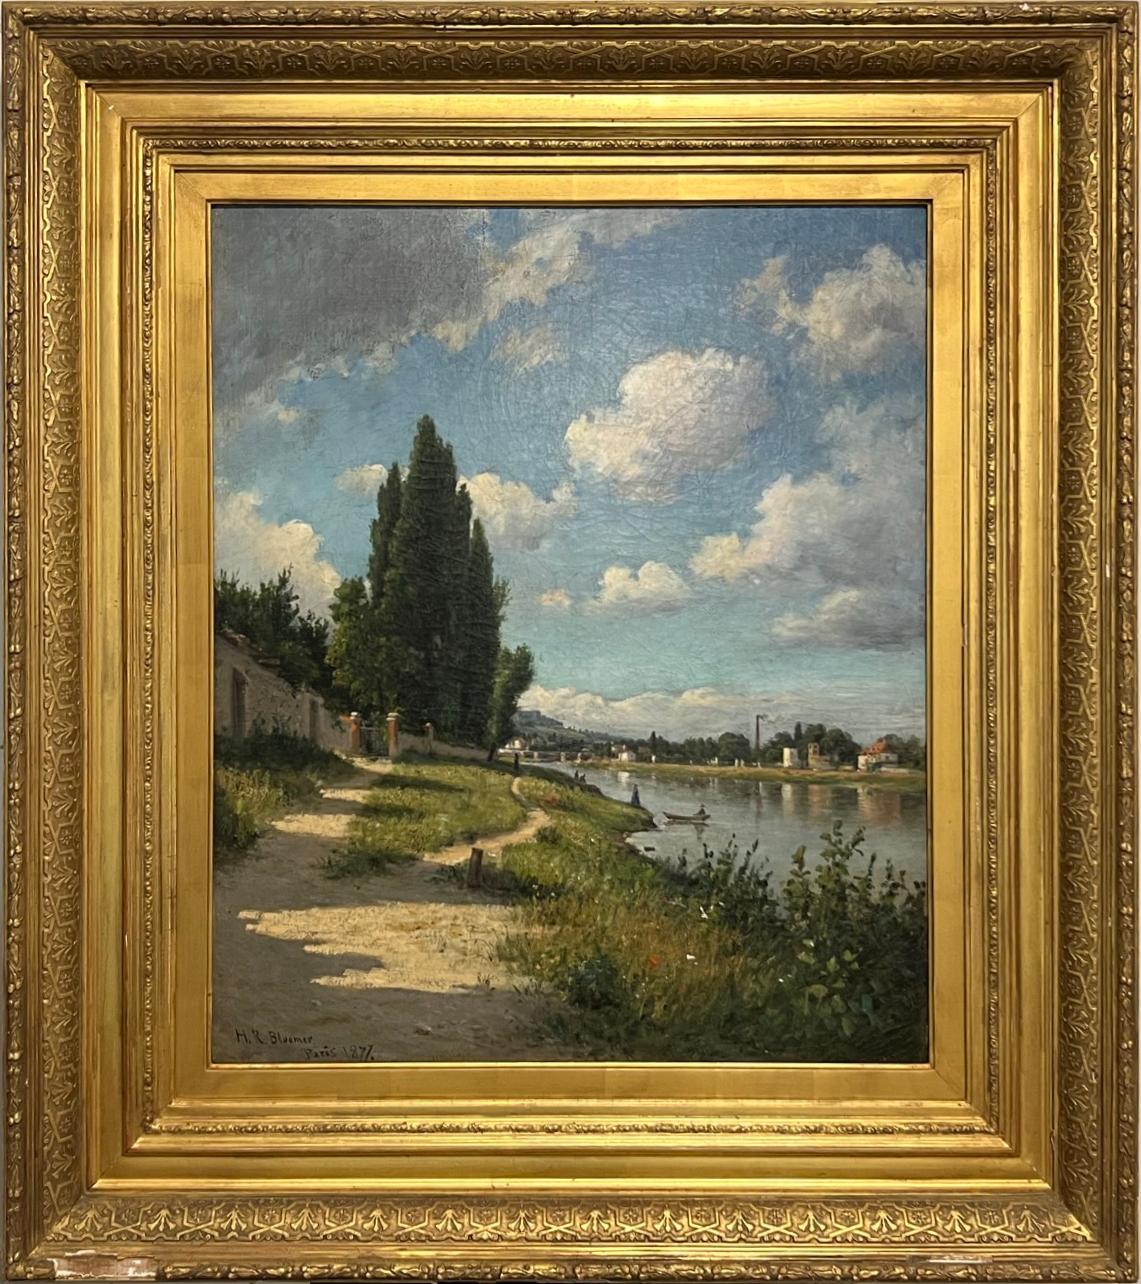  Hiram Reynolds Bloomer Landscape Painting - 19th Century American Impressionist Painting of French River Scene